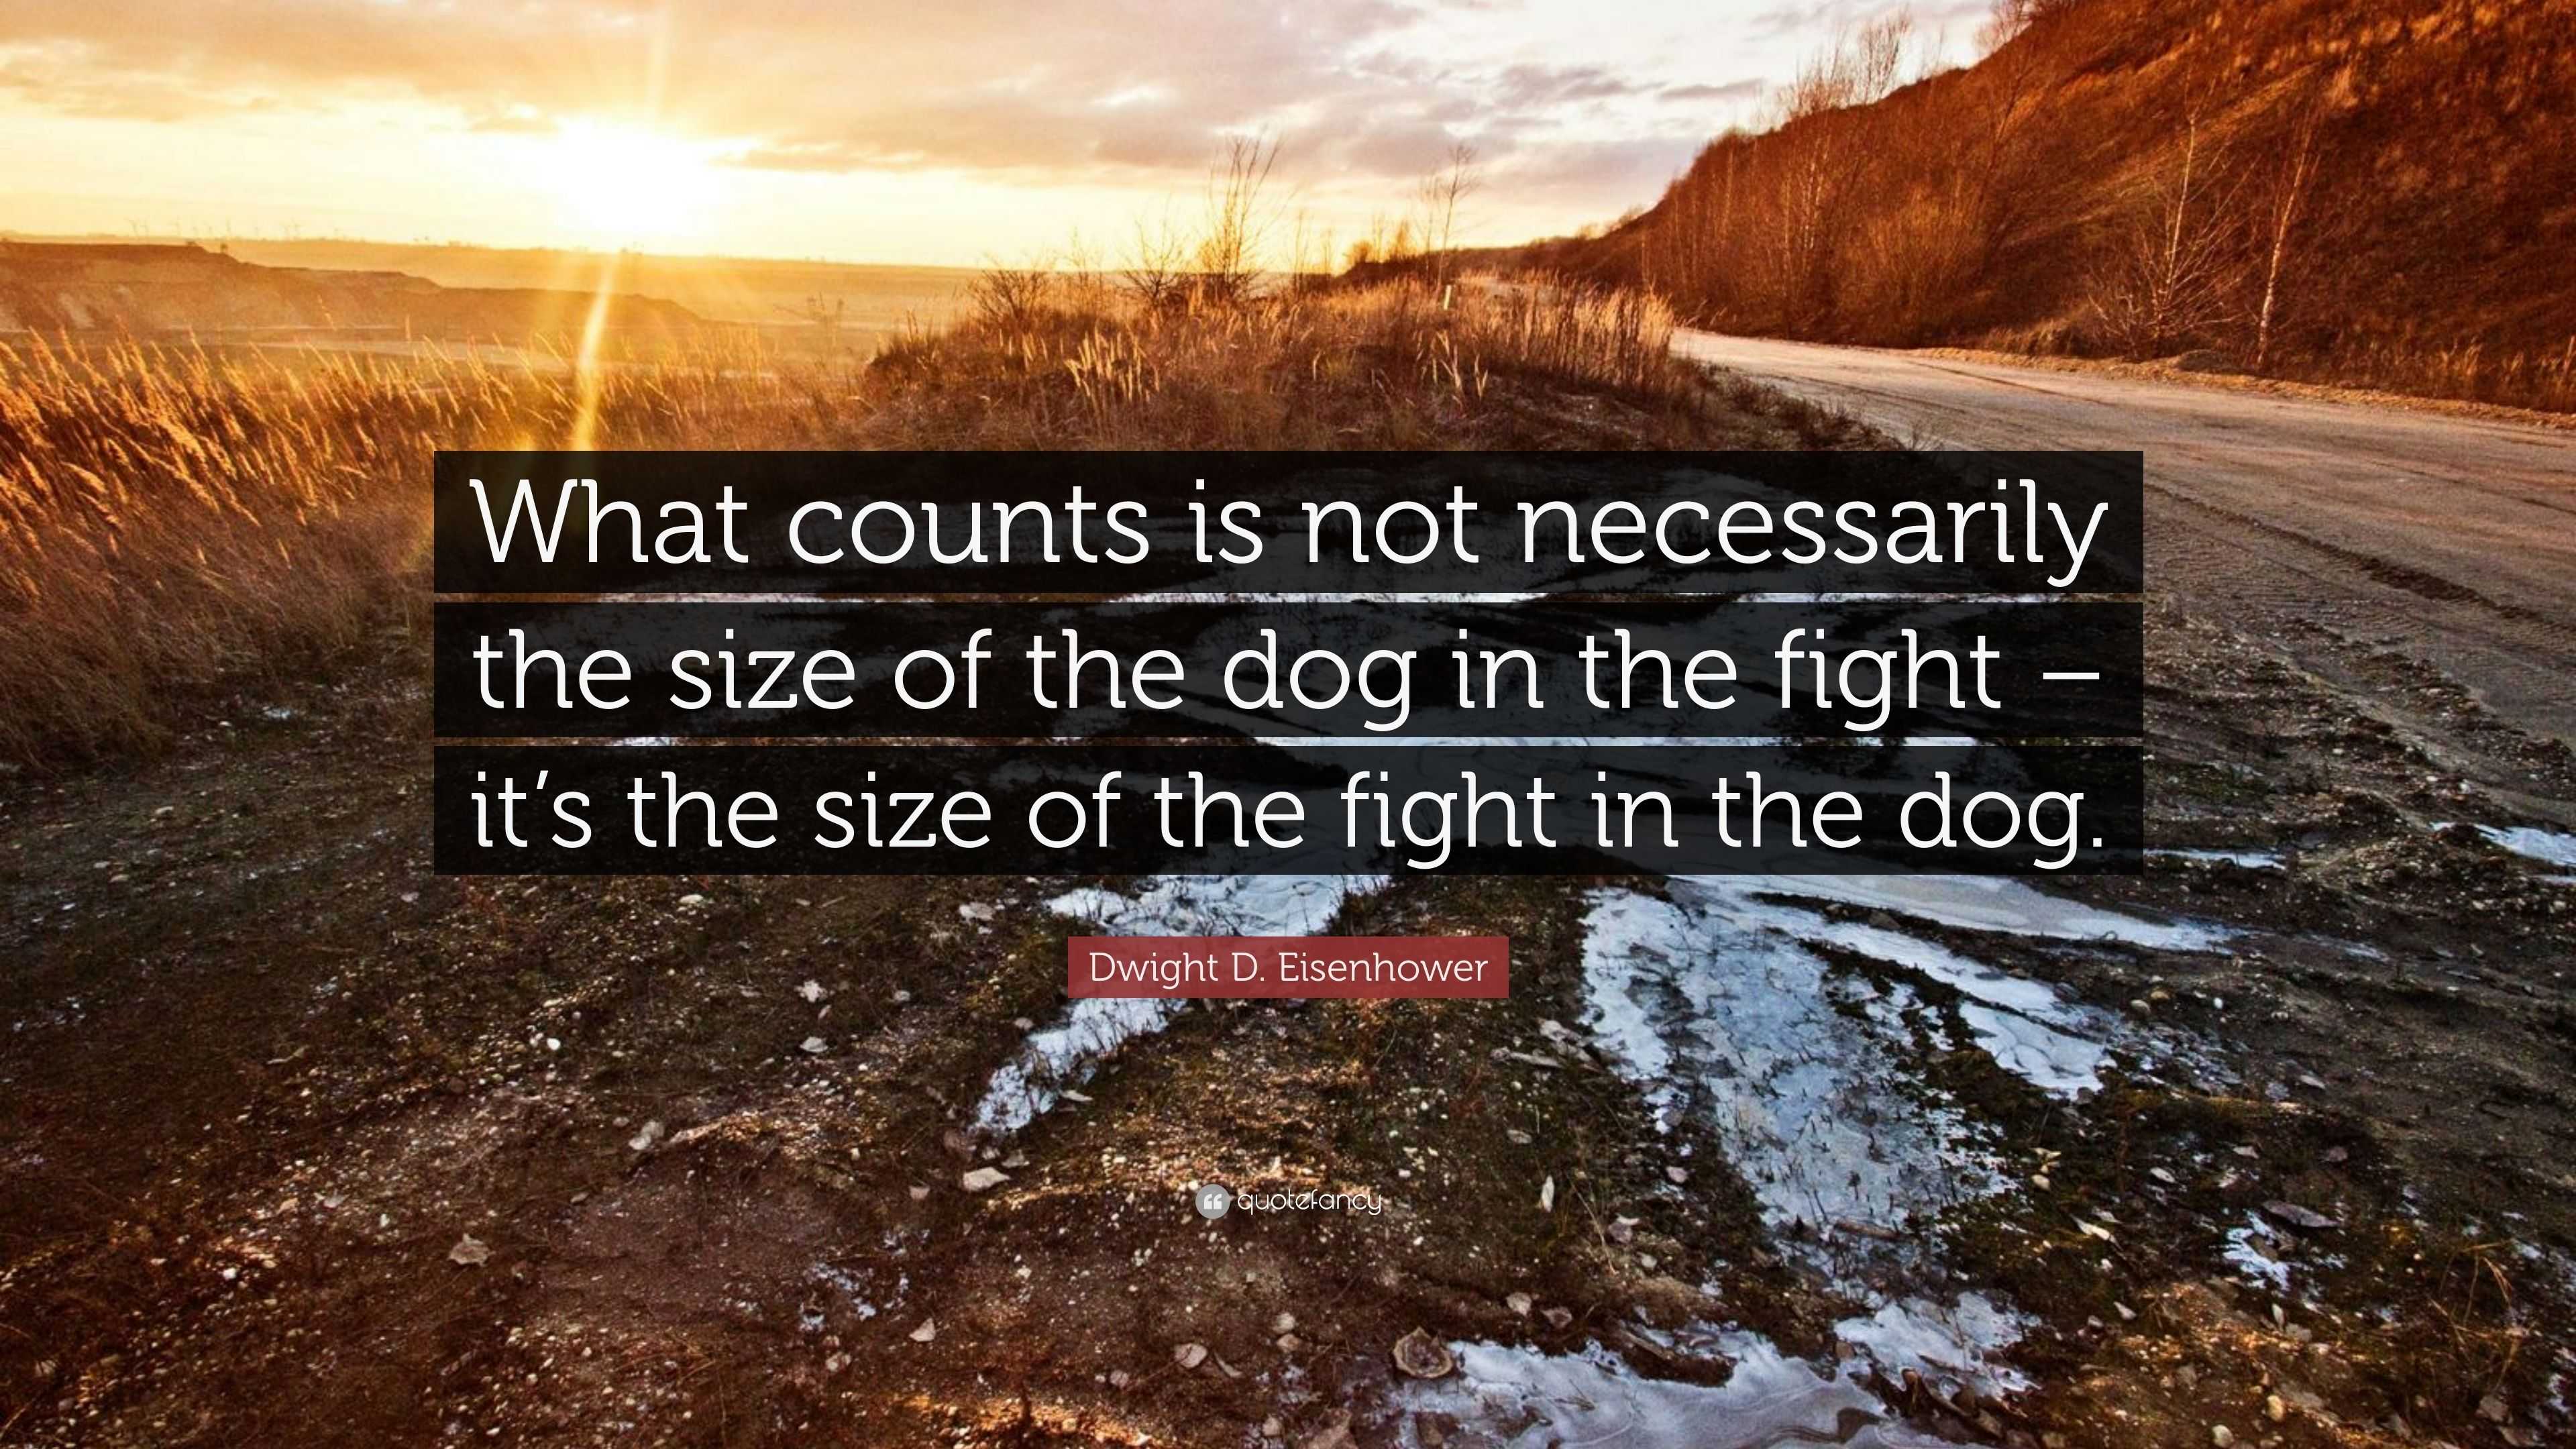 Dwight D. Eisenhower Quote: “What counts is not necessarily the size of ...